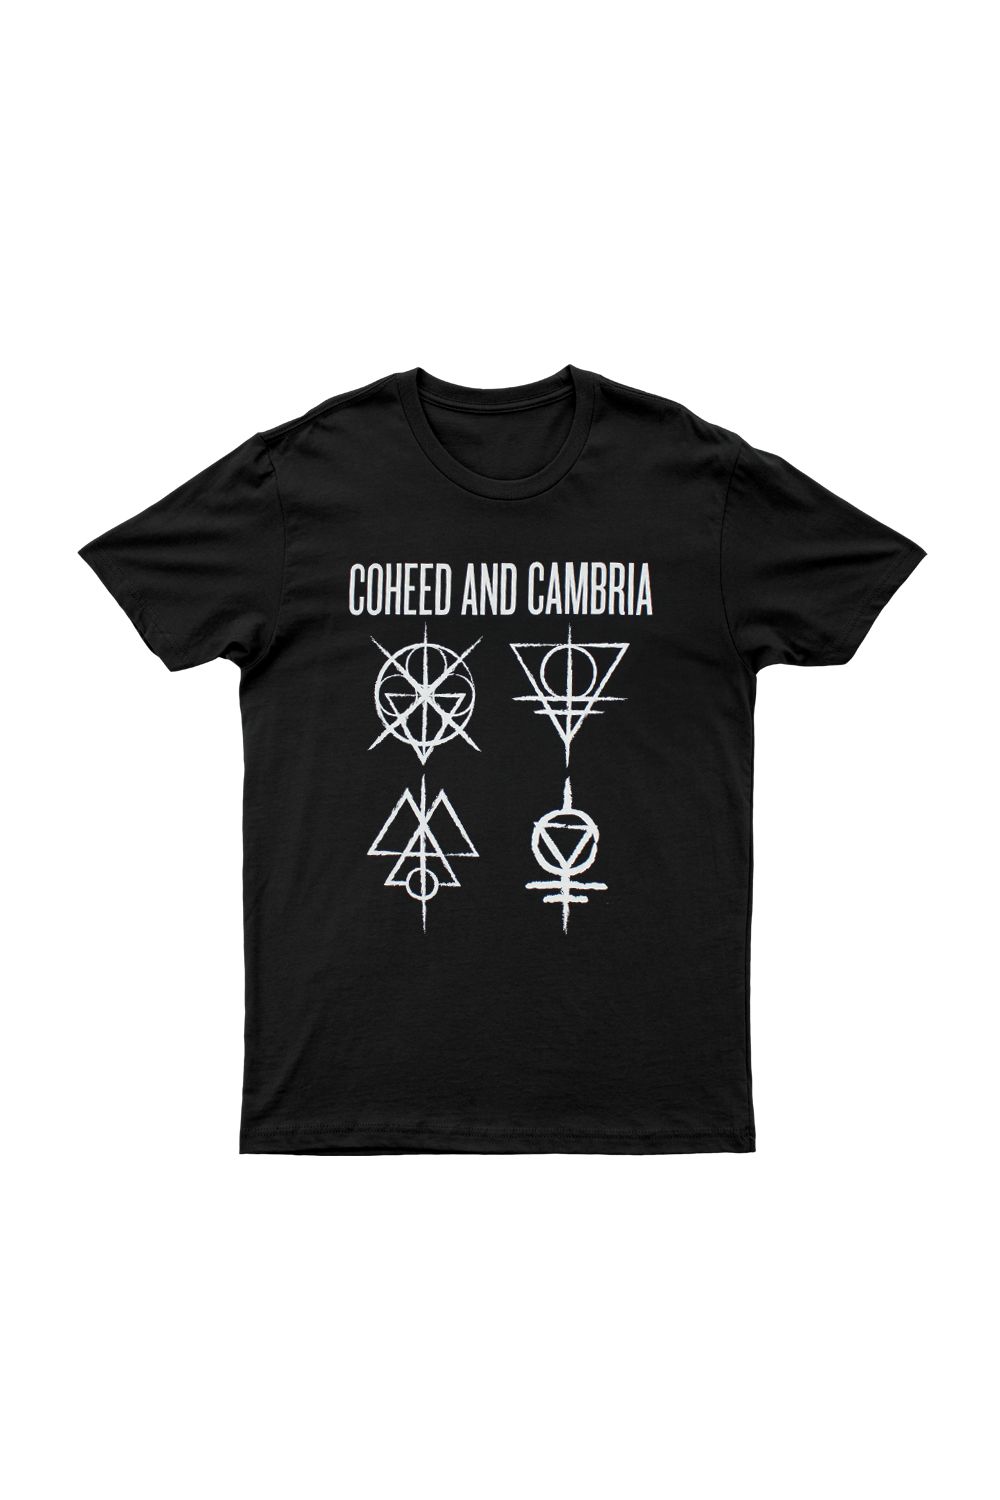 Coheed And Cambria — Coheed And Cambria Official Merchandise — Band T